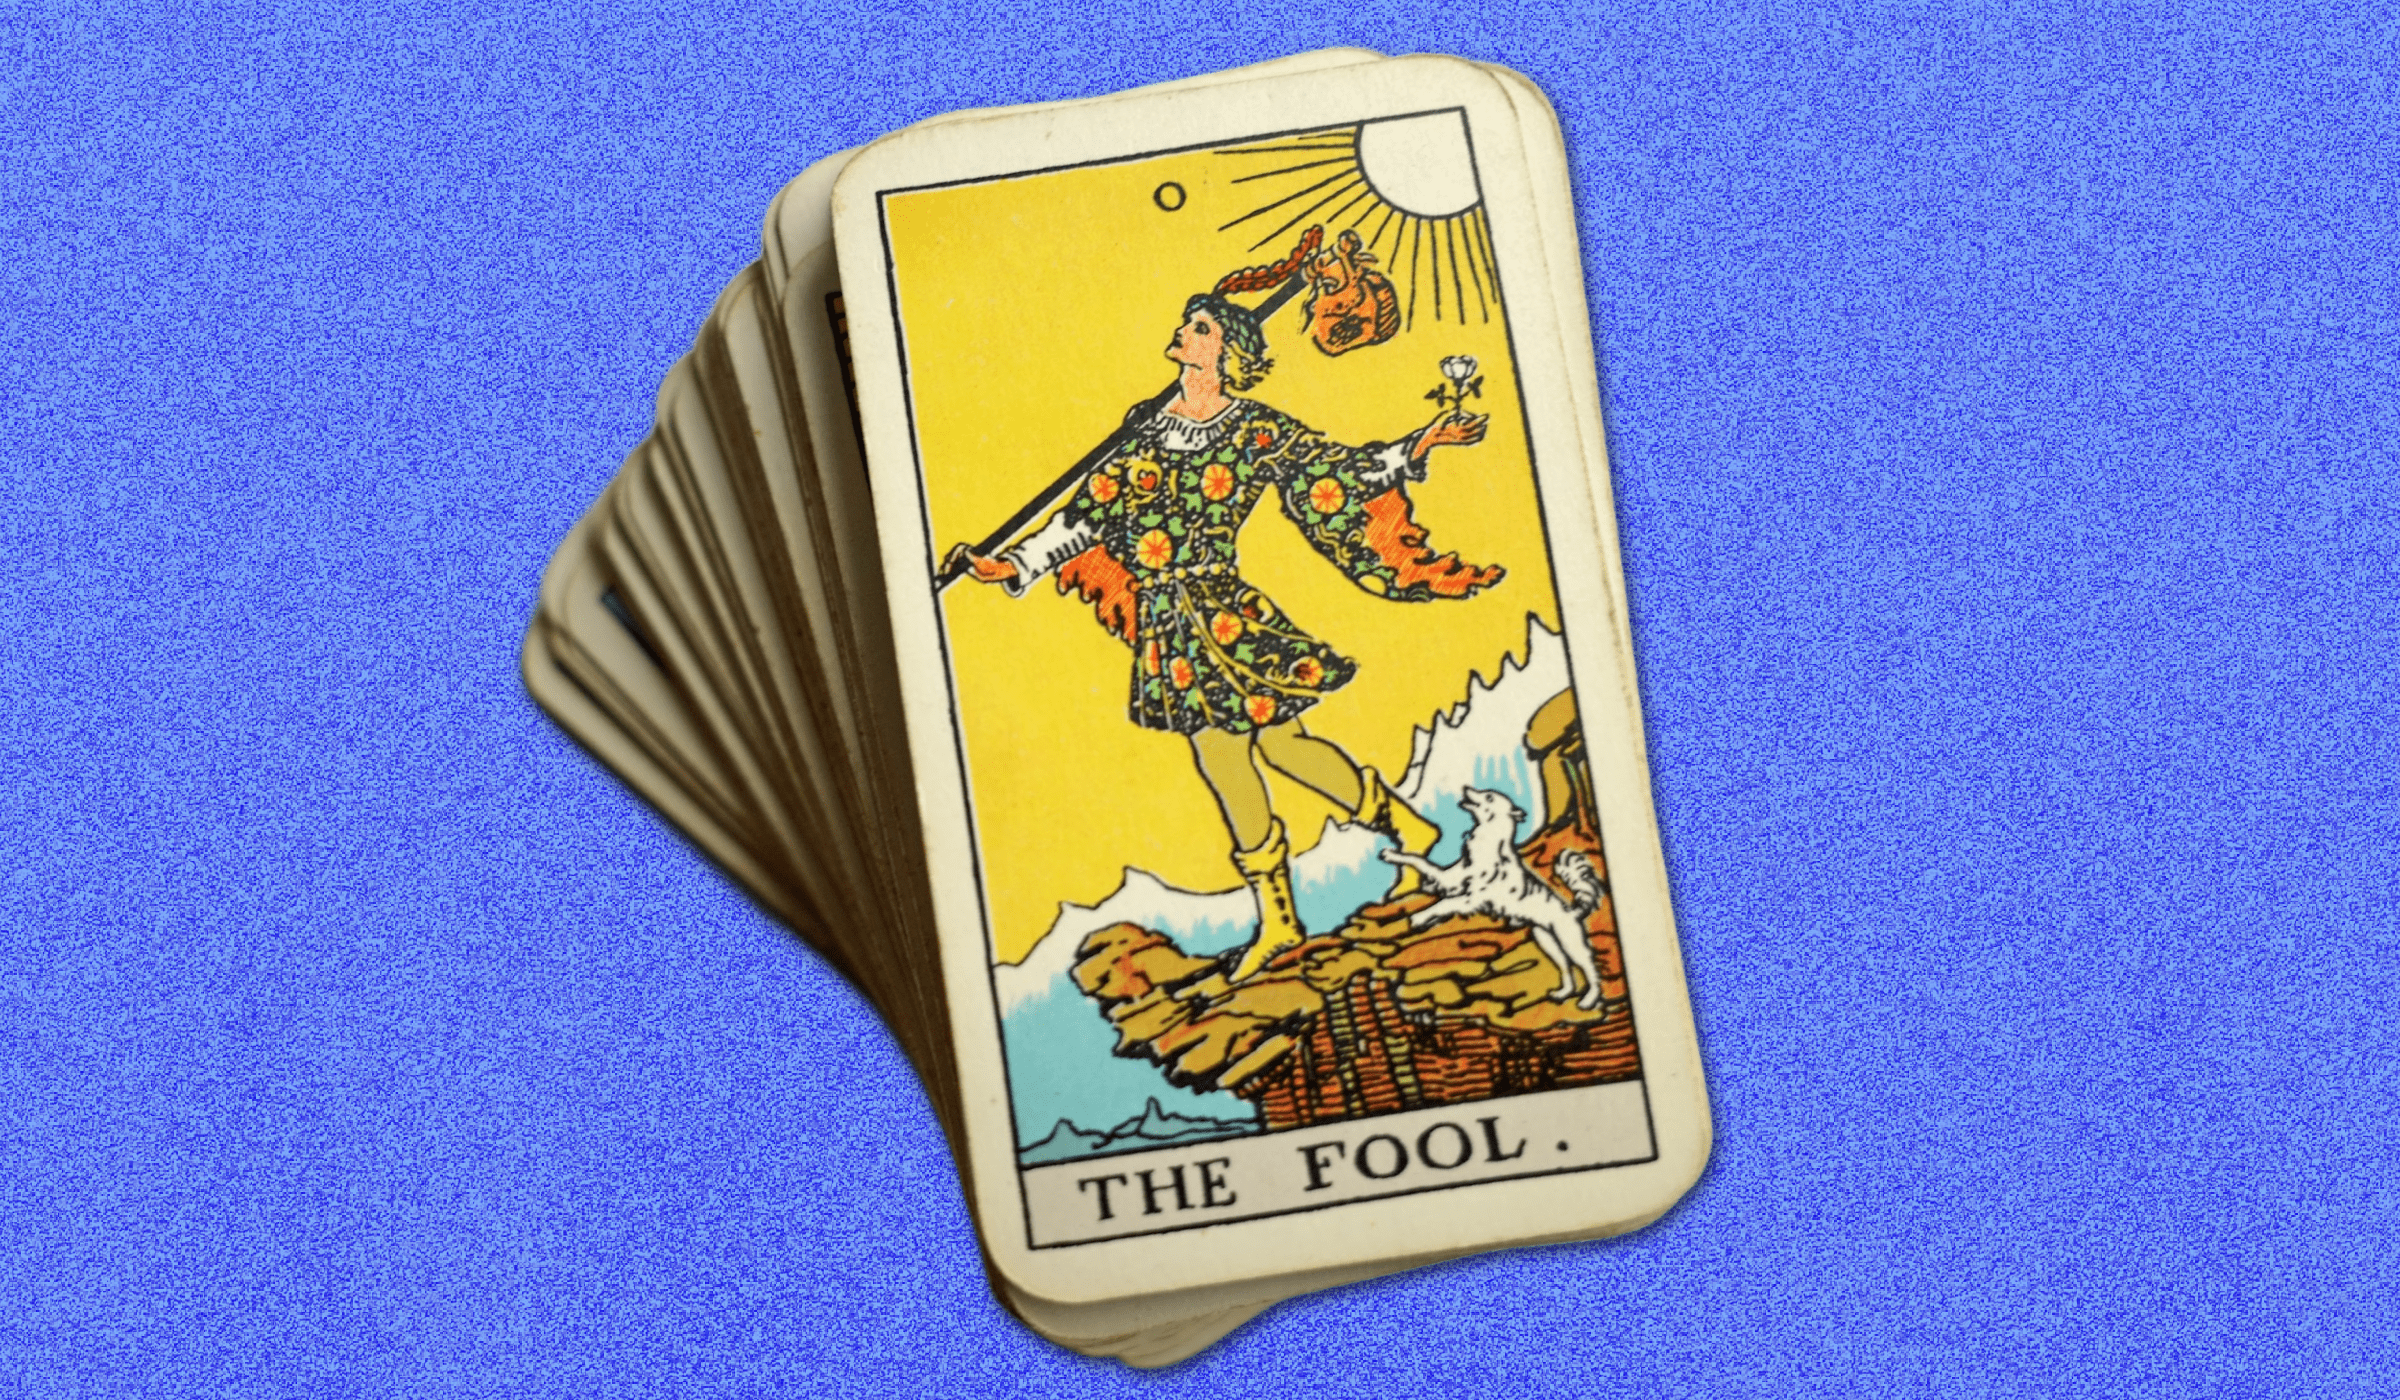 A deck of tarot cards with the fool revealed on top of the stack, against a blue background.